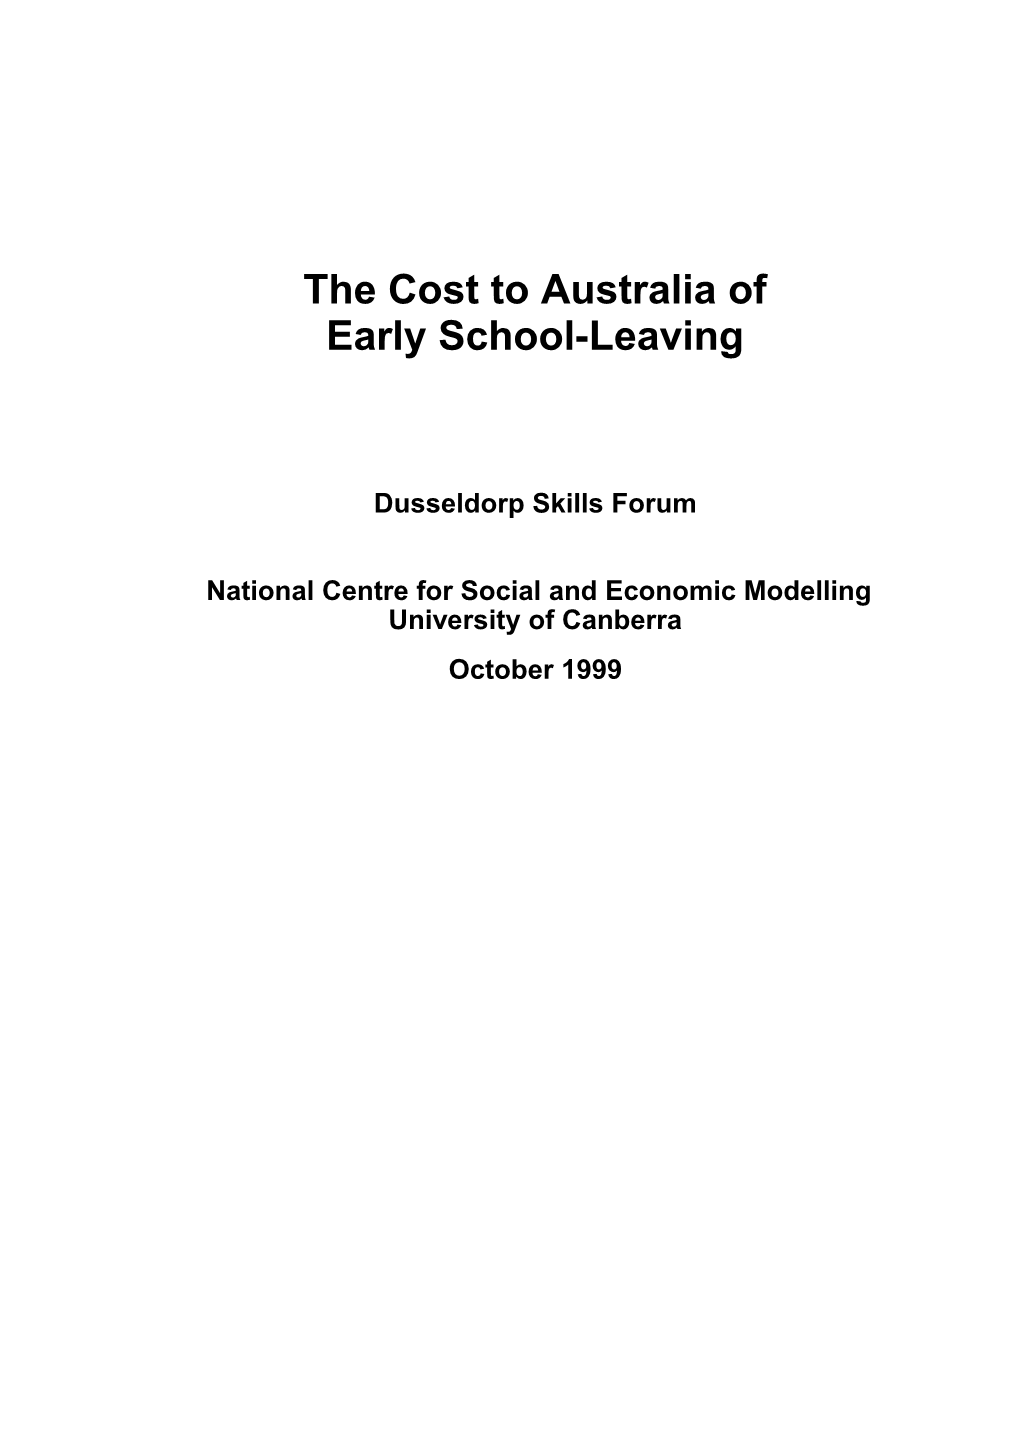 The Cost to Australia of Early School-Leaving